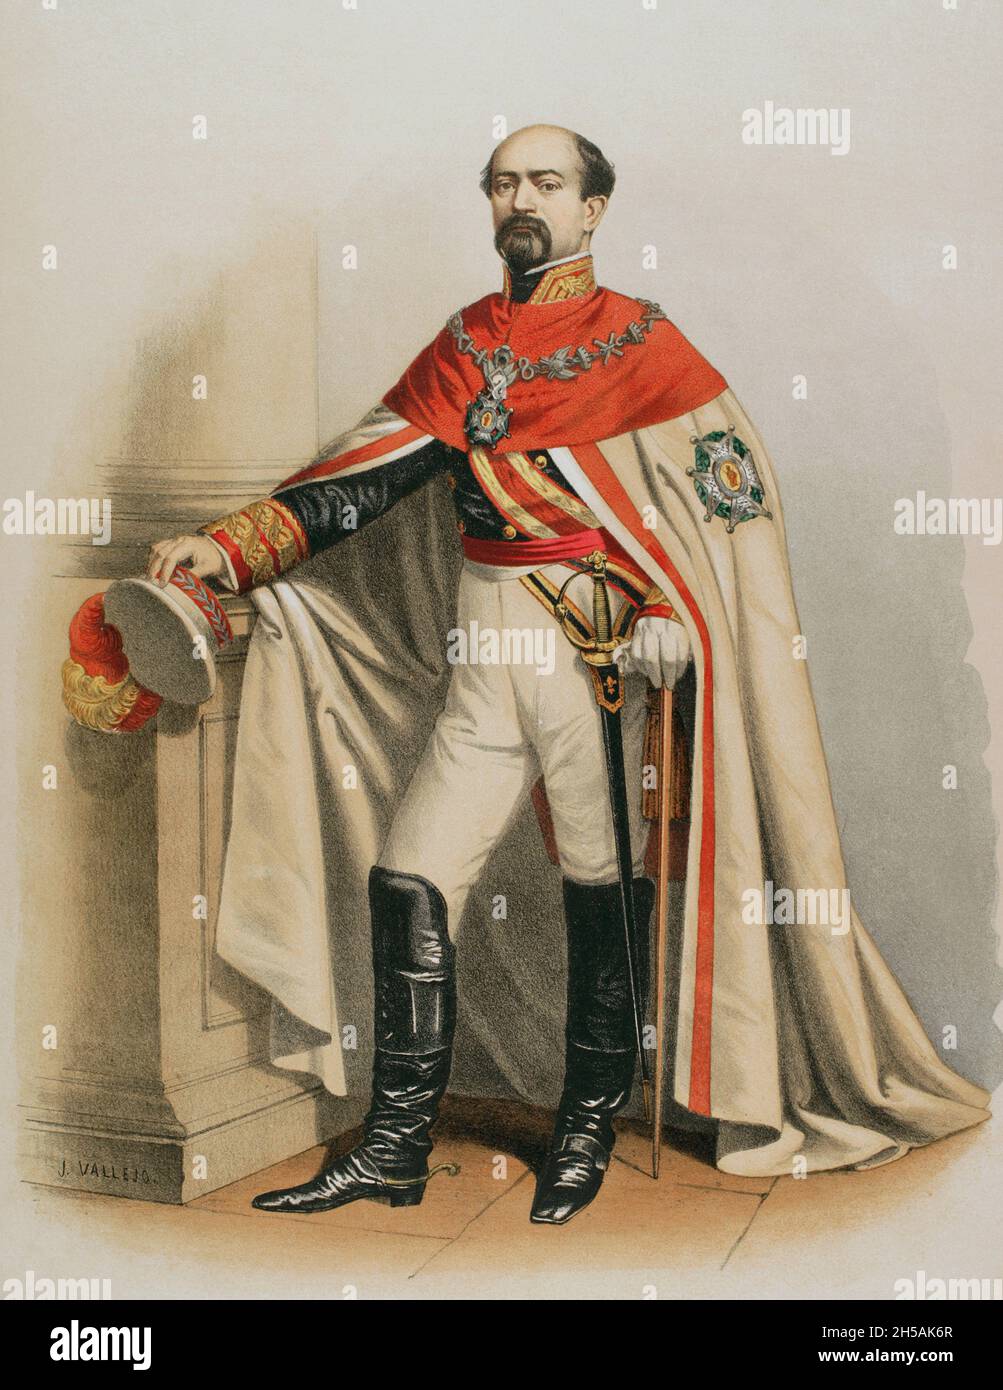 Knight in ceremonial dress and wearing the Grand Cross of the Royal and Military Order of  Saint Ferdinand, also known as the Laureate Cross of Saint Ferdinand. Spain’s highest military decoration for gallantry. The order was established by the Cádiz Cortes in 1811 to honour the heroic fight against the Napoleonic army. General Manuel Pavía y Lacy (1814-1896) wearing the order’s coat and chain. Chromolithography. 'Historia de las Ordenes de Caballería y de las Condecoraciones Españolas' (History of the Orders of Chivalry and the Spanish Decorations). Madrid, 1865. Spain. Stock Photo